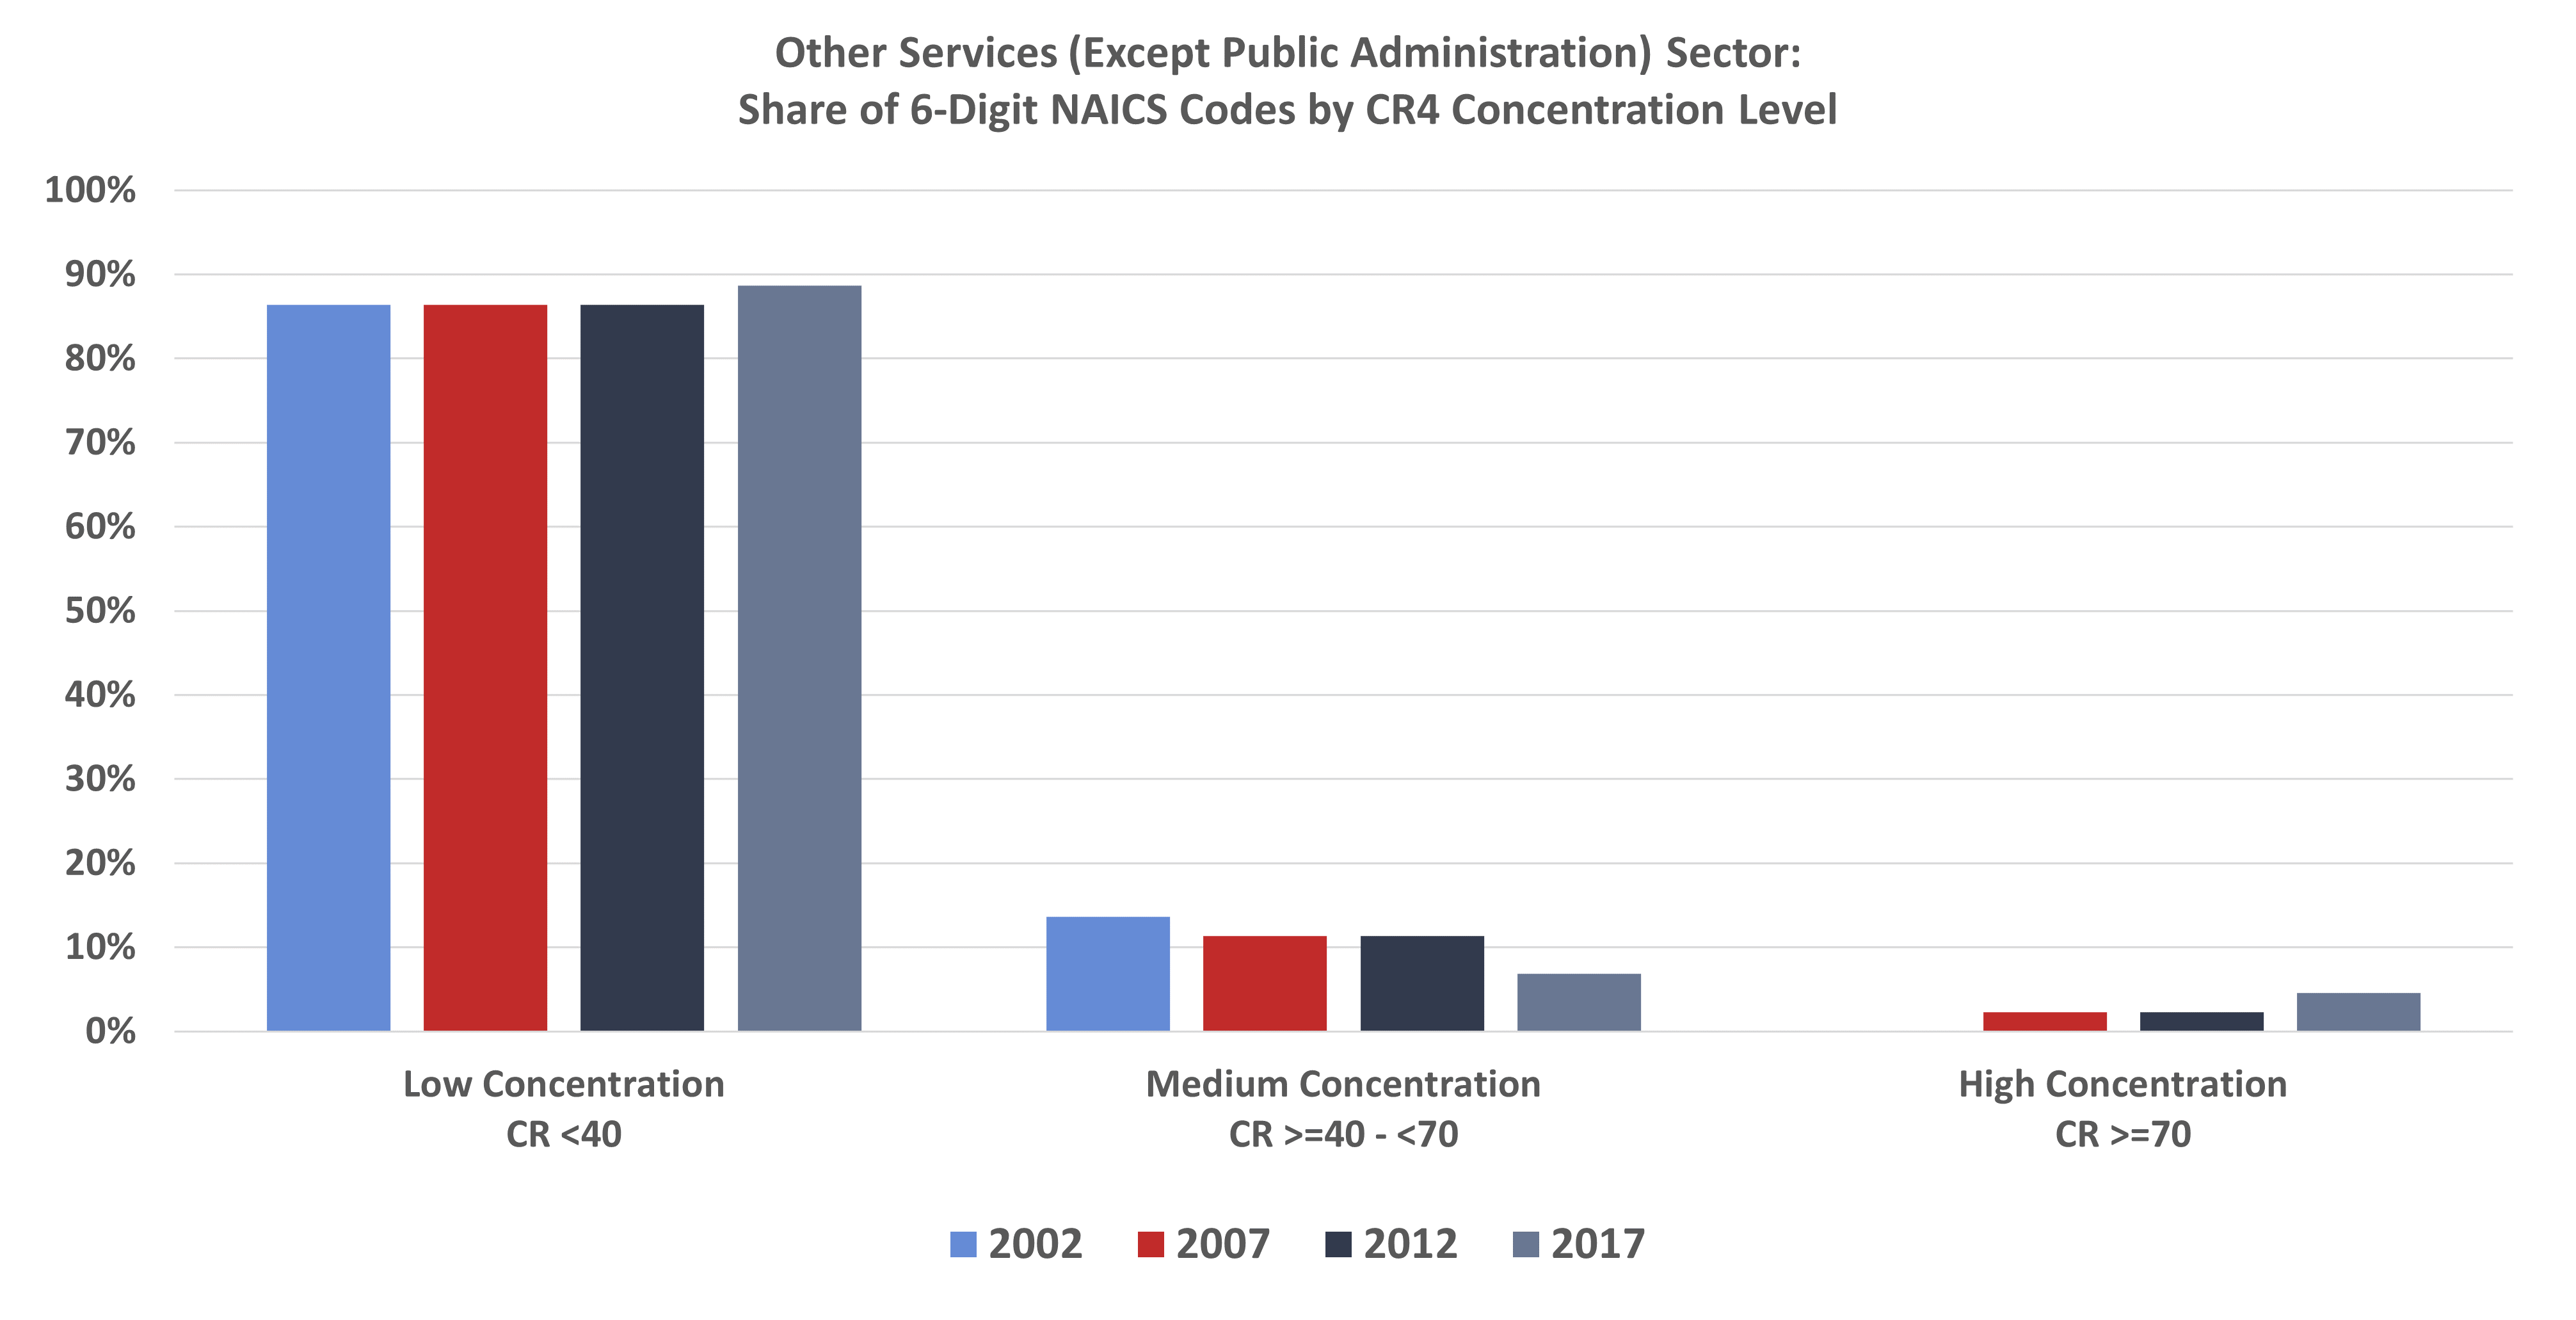 Other Services (Except Public Administration) Sector: Share of 6-Digit NAICS Codes by CR4 Concentration Level